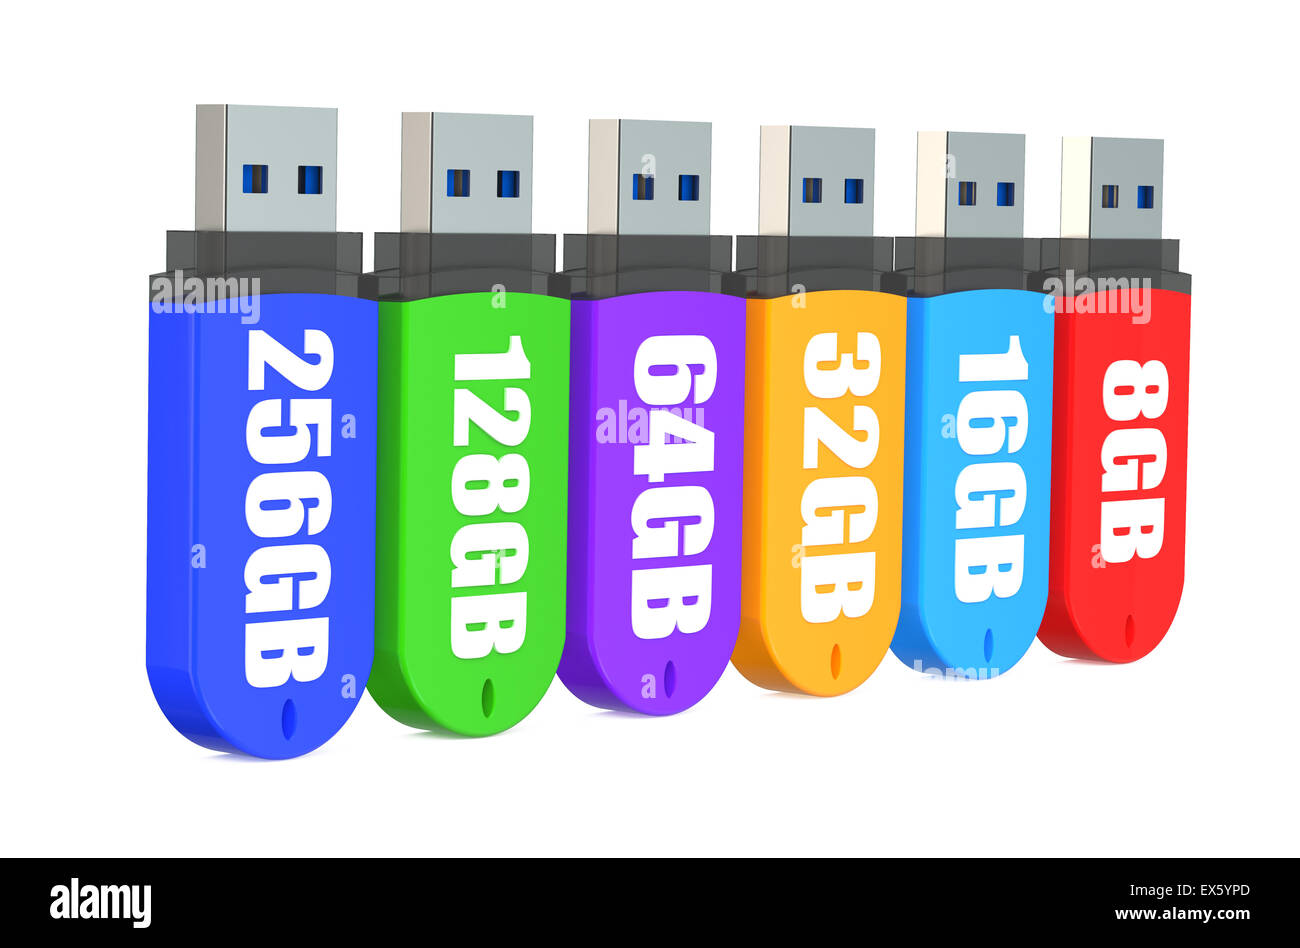 3d Row of color USB flash drives isolated on white background Stock Photo